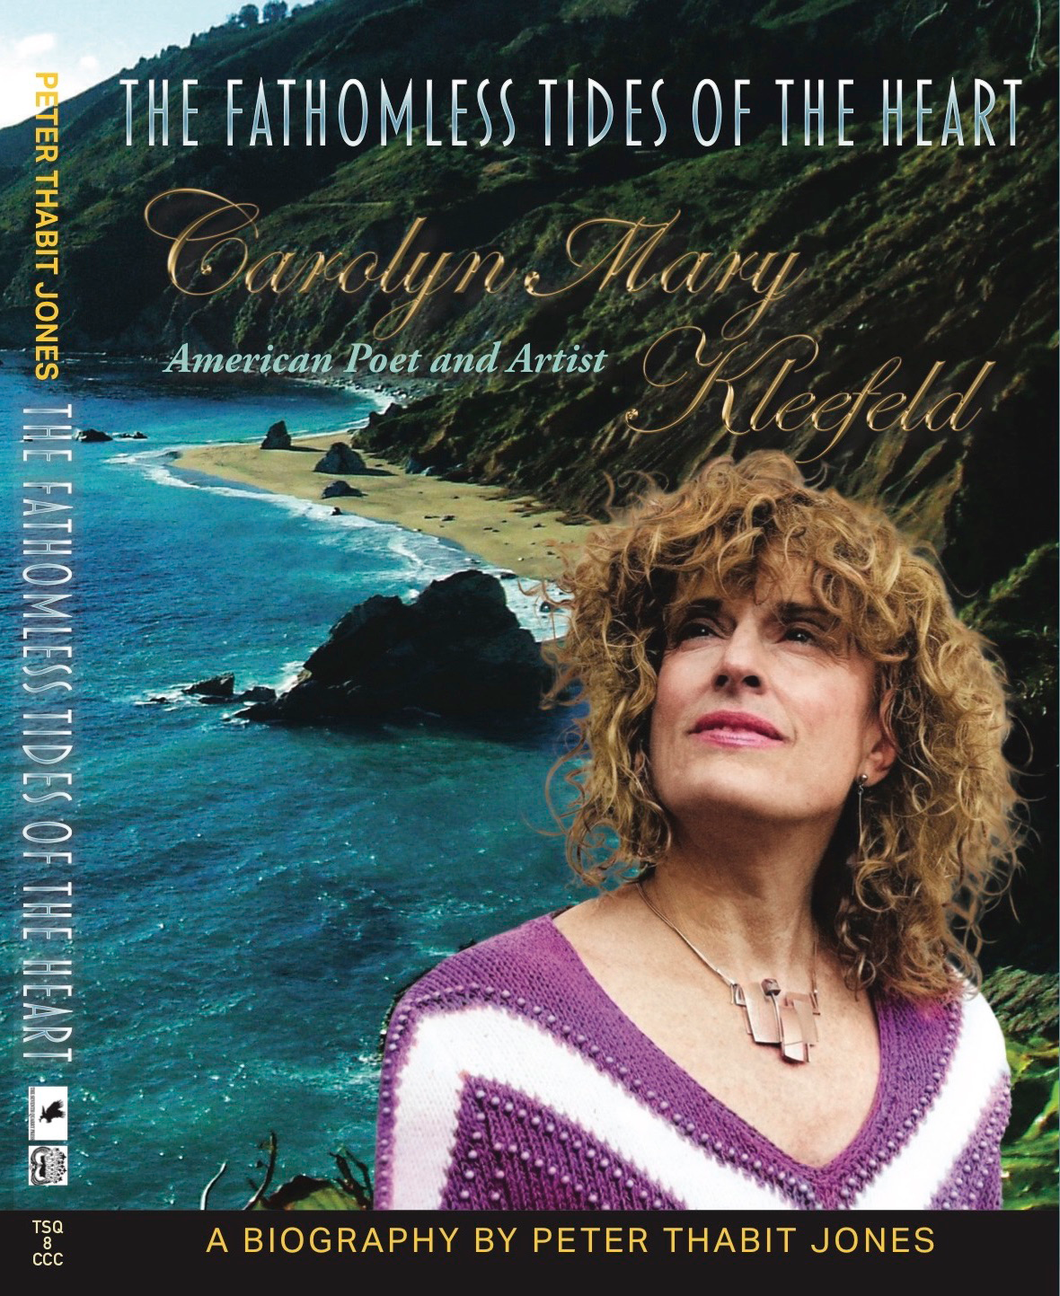 THE FATHOMLESS TIDES OF THE HEART/American poet and artist Carolyn Mary Kleefeld - a biography by Peter Thabit Jones